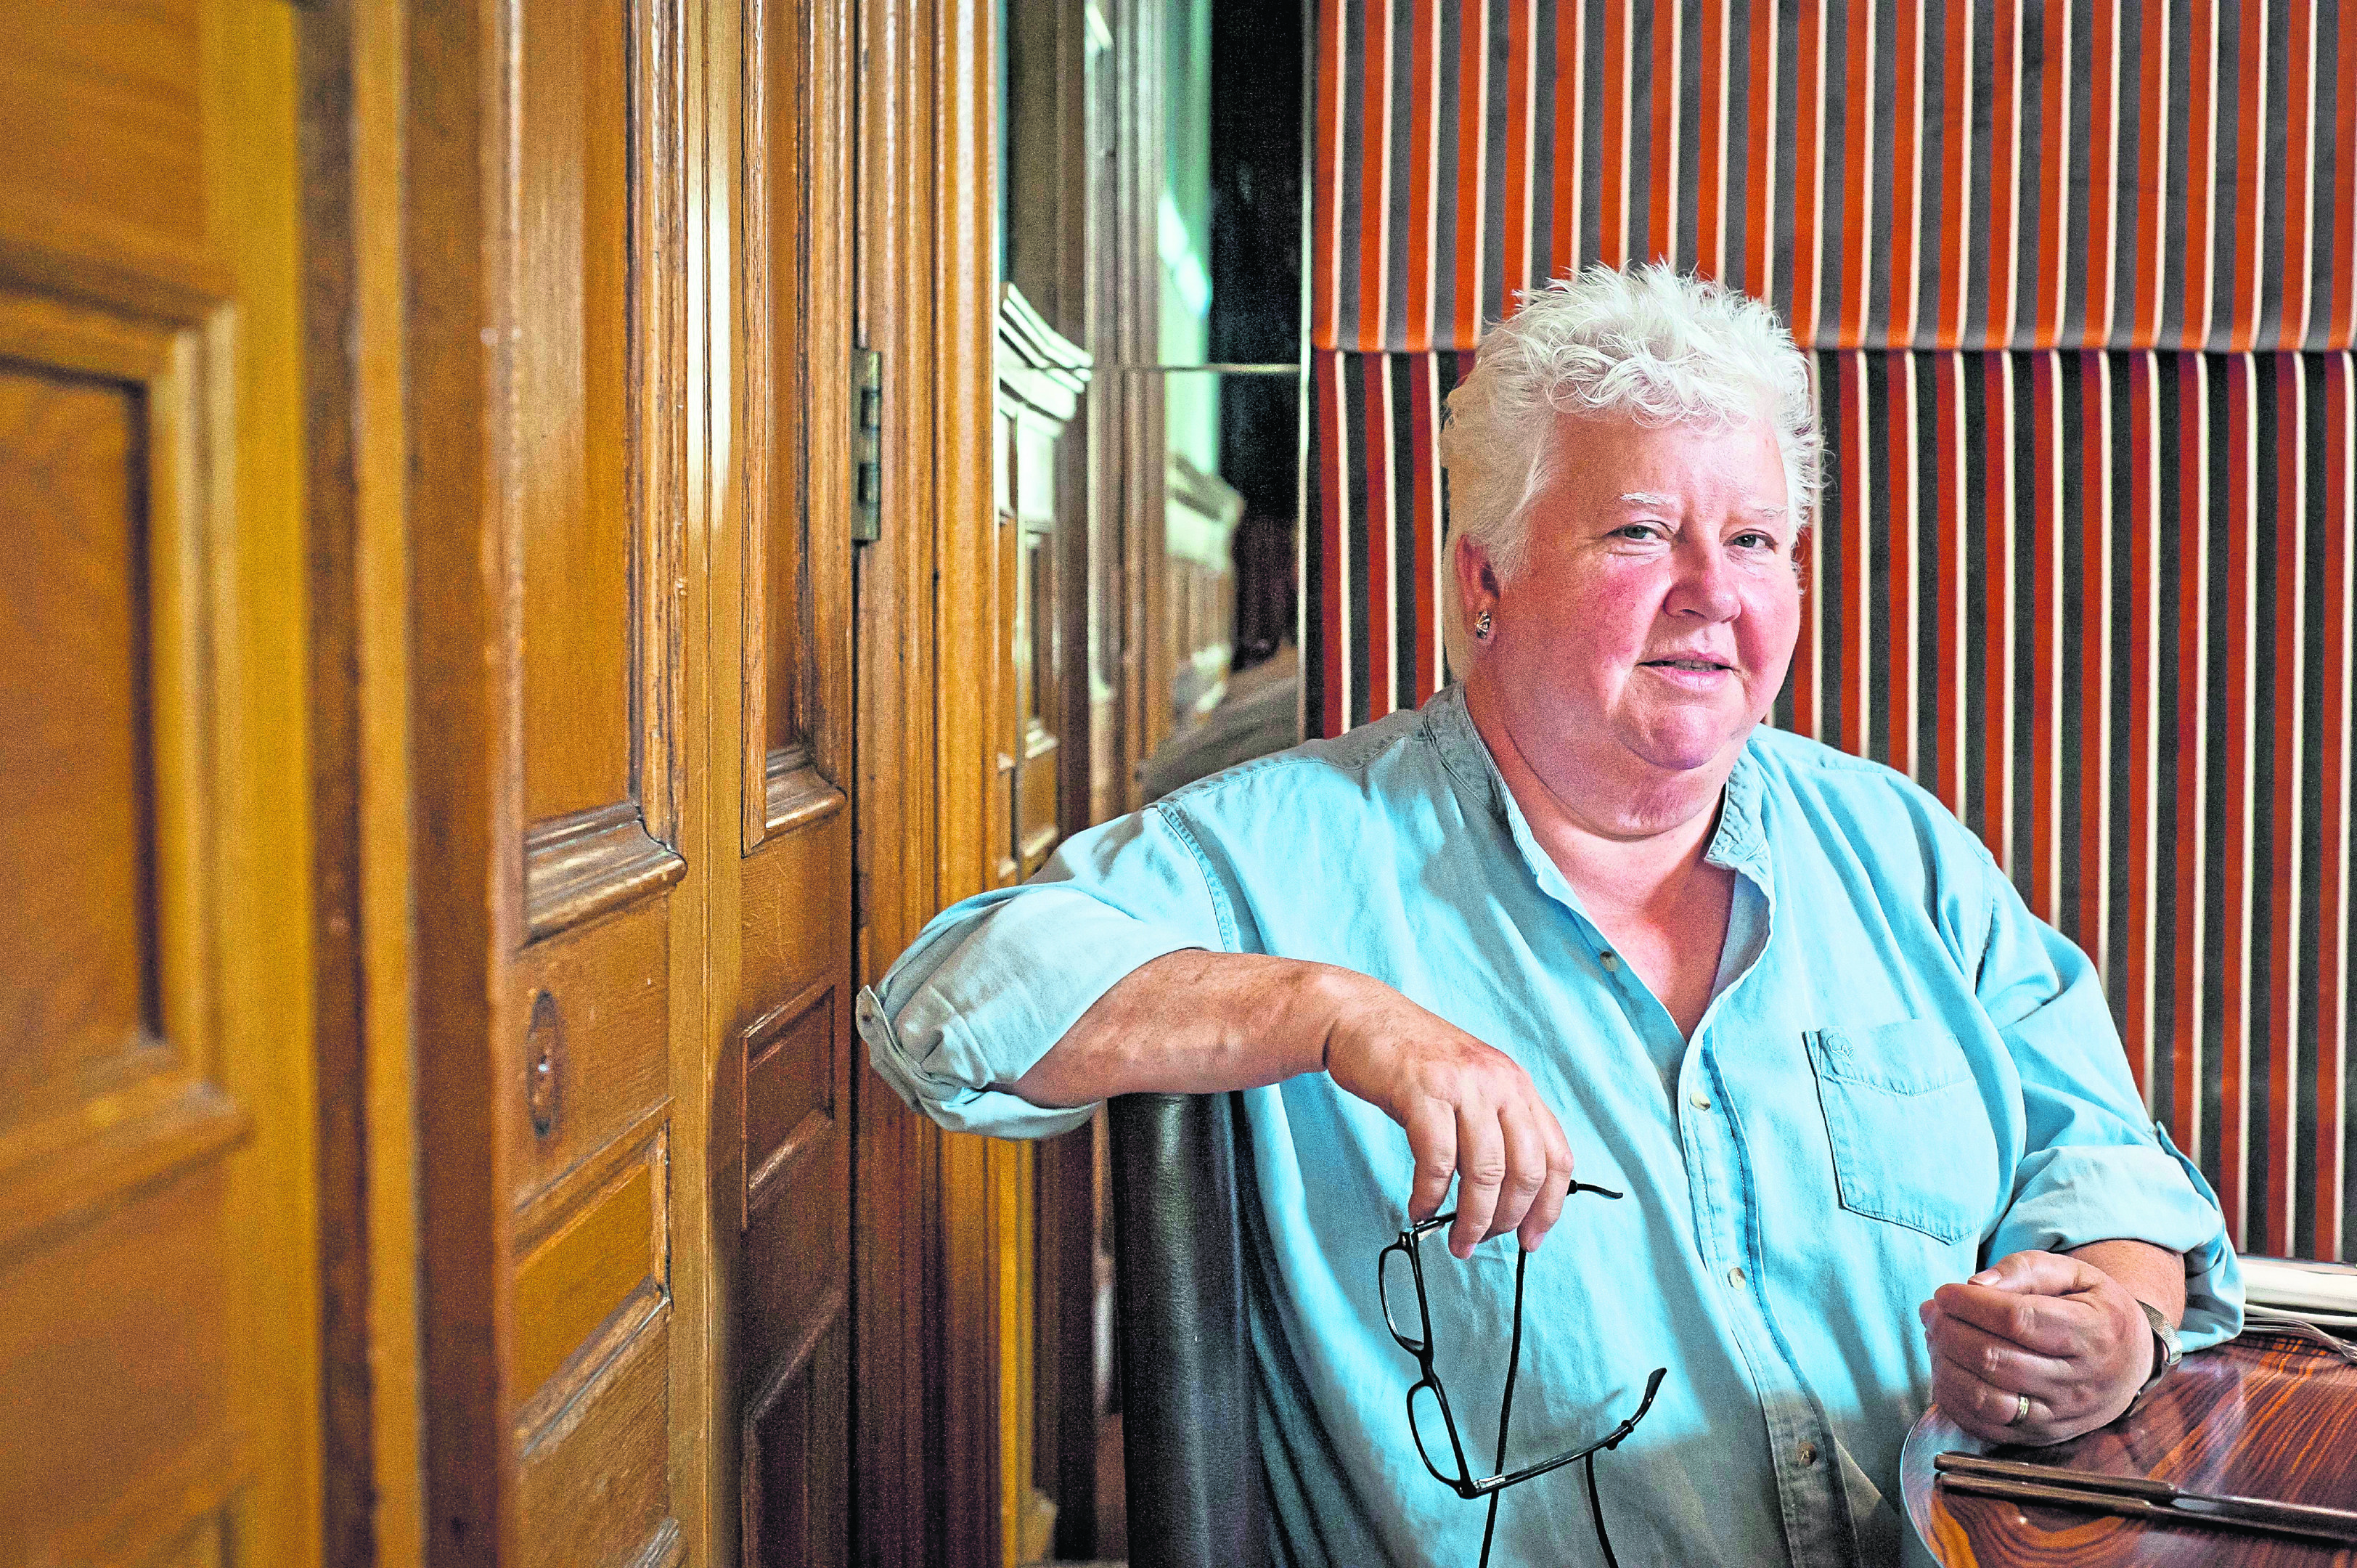 Writer Val McDermid is concerned about female wellbeing.